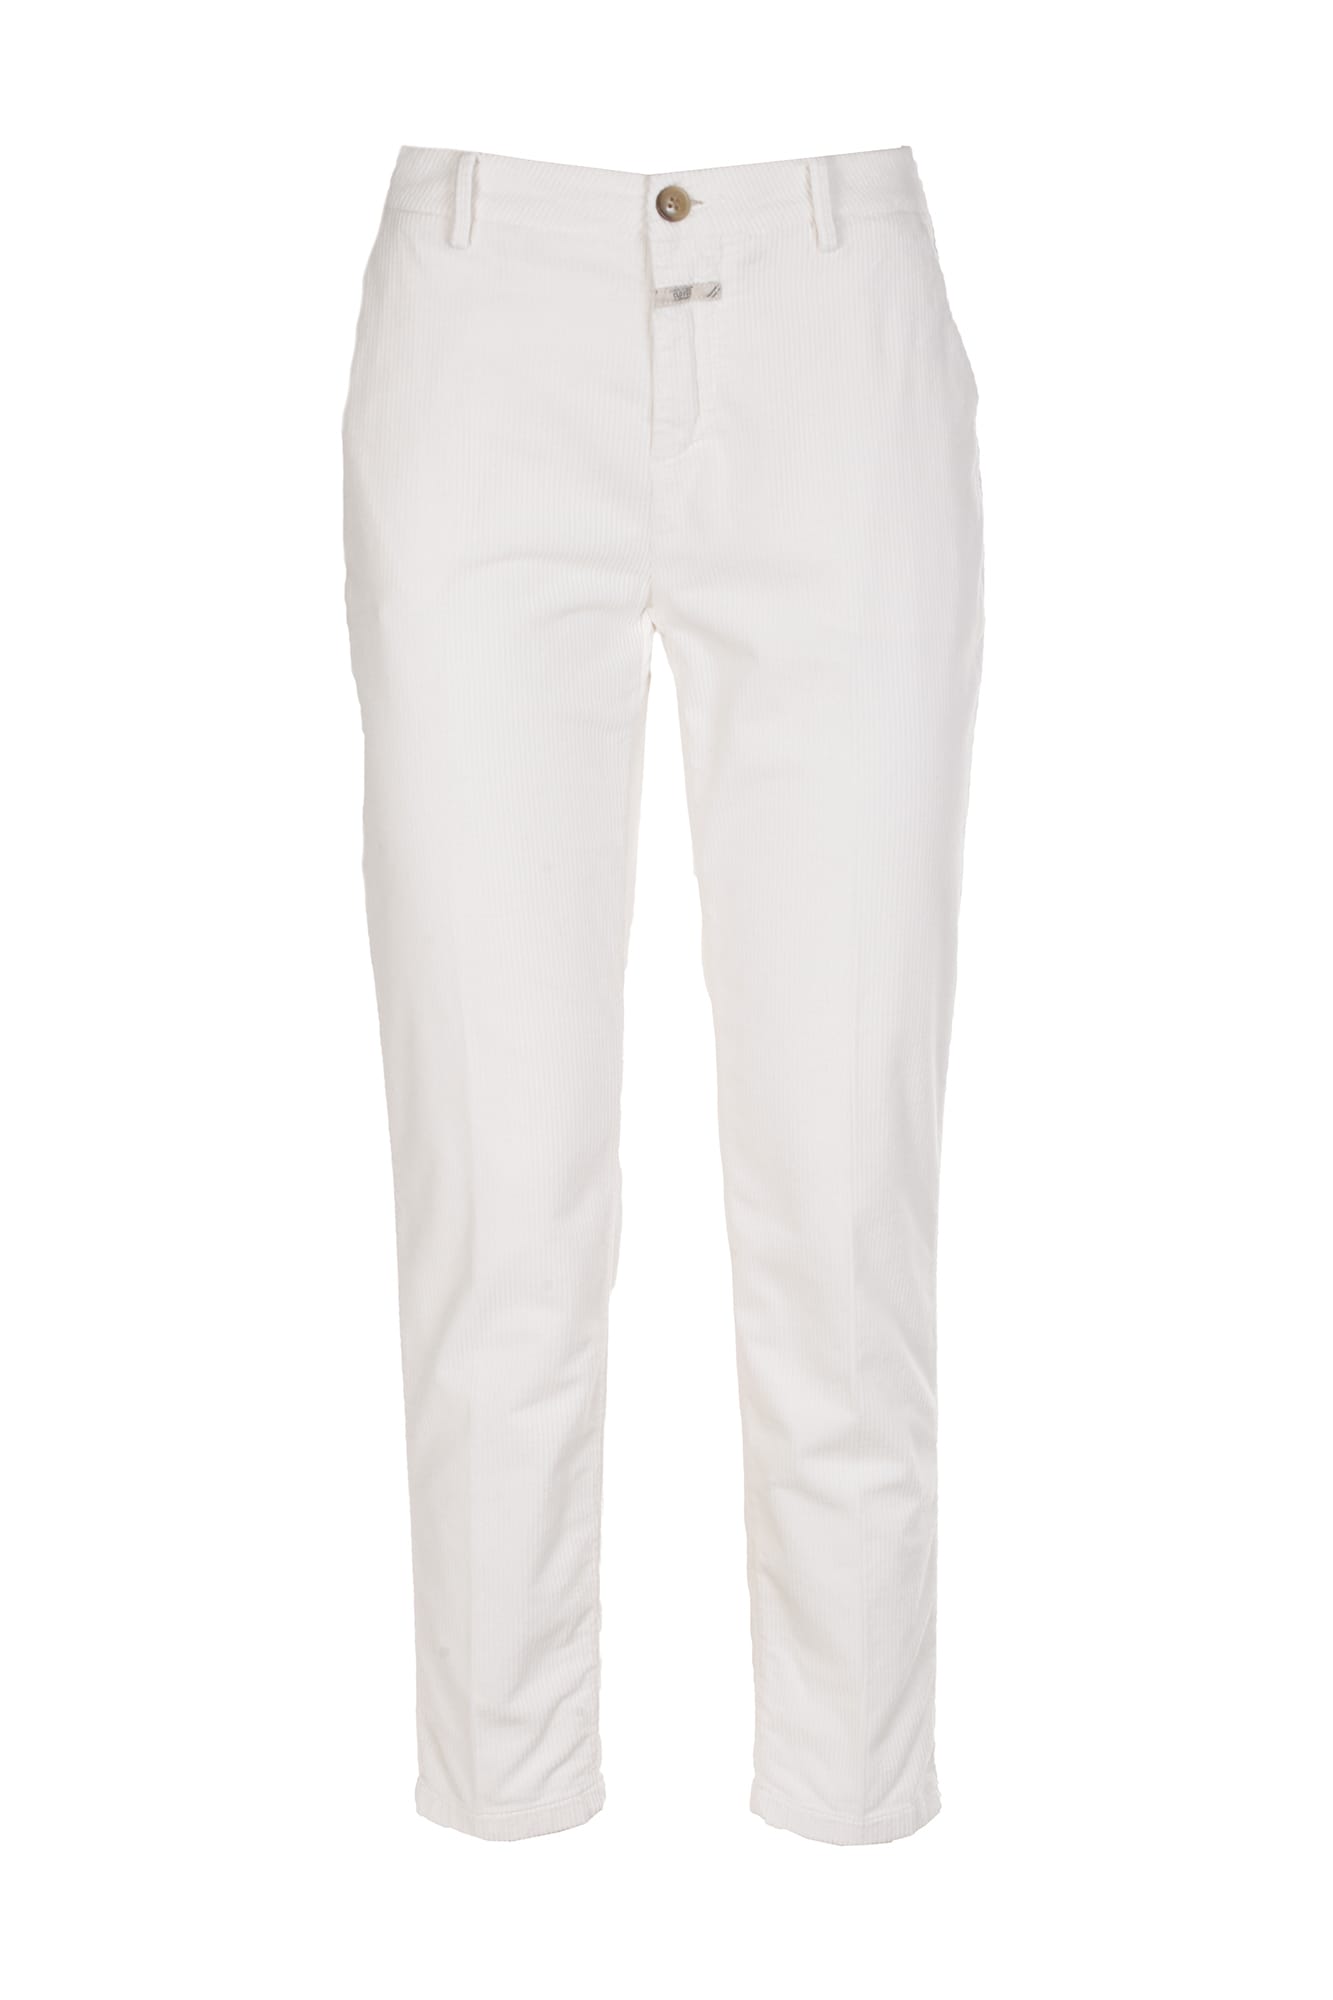 Closed cotton trousers